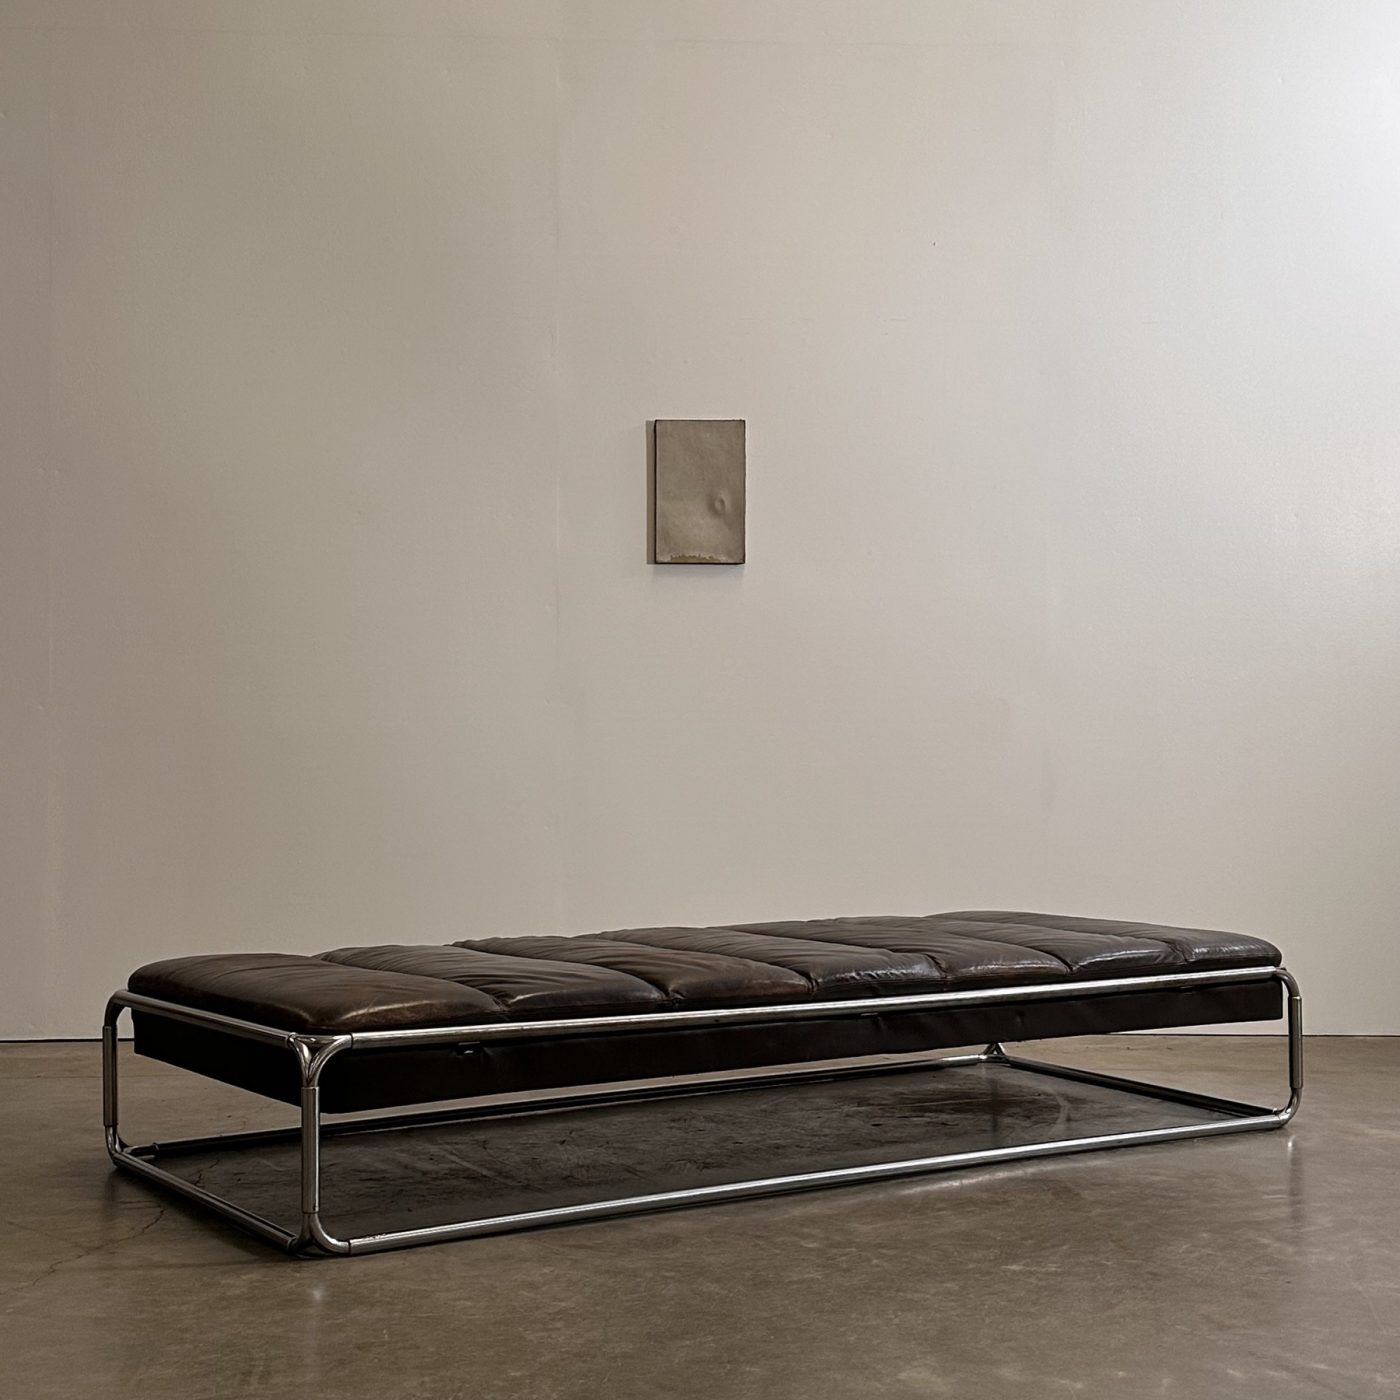 objet-vagabond-leather-couch0009